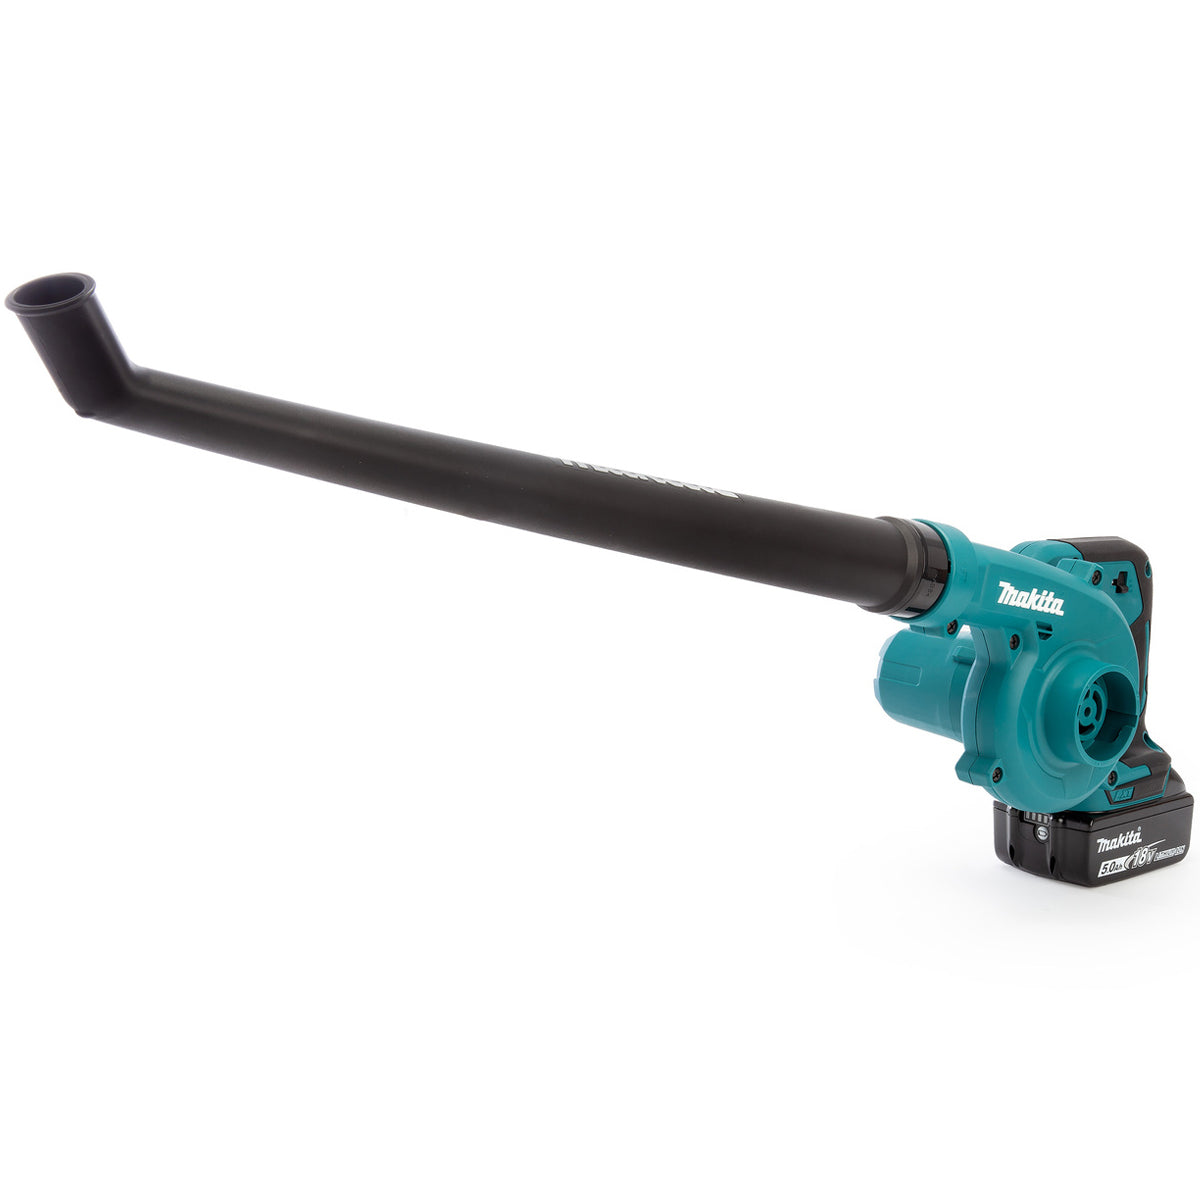 Makita DUB186RT 18V Cordless Leaf Blower with 1 x 5.0Ah Battery & Charger